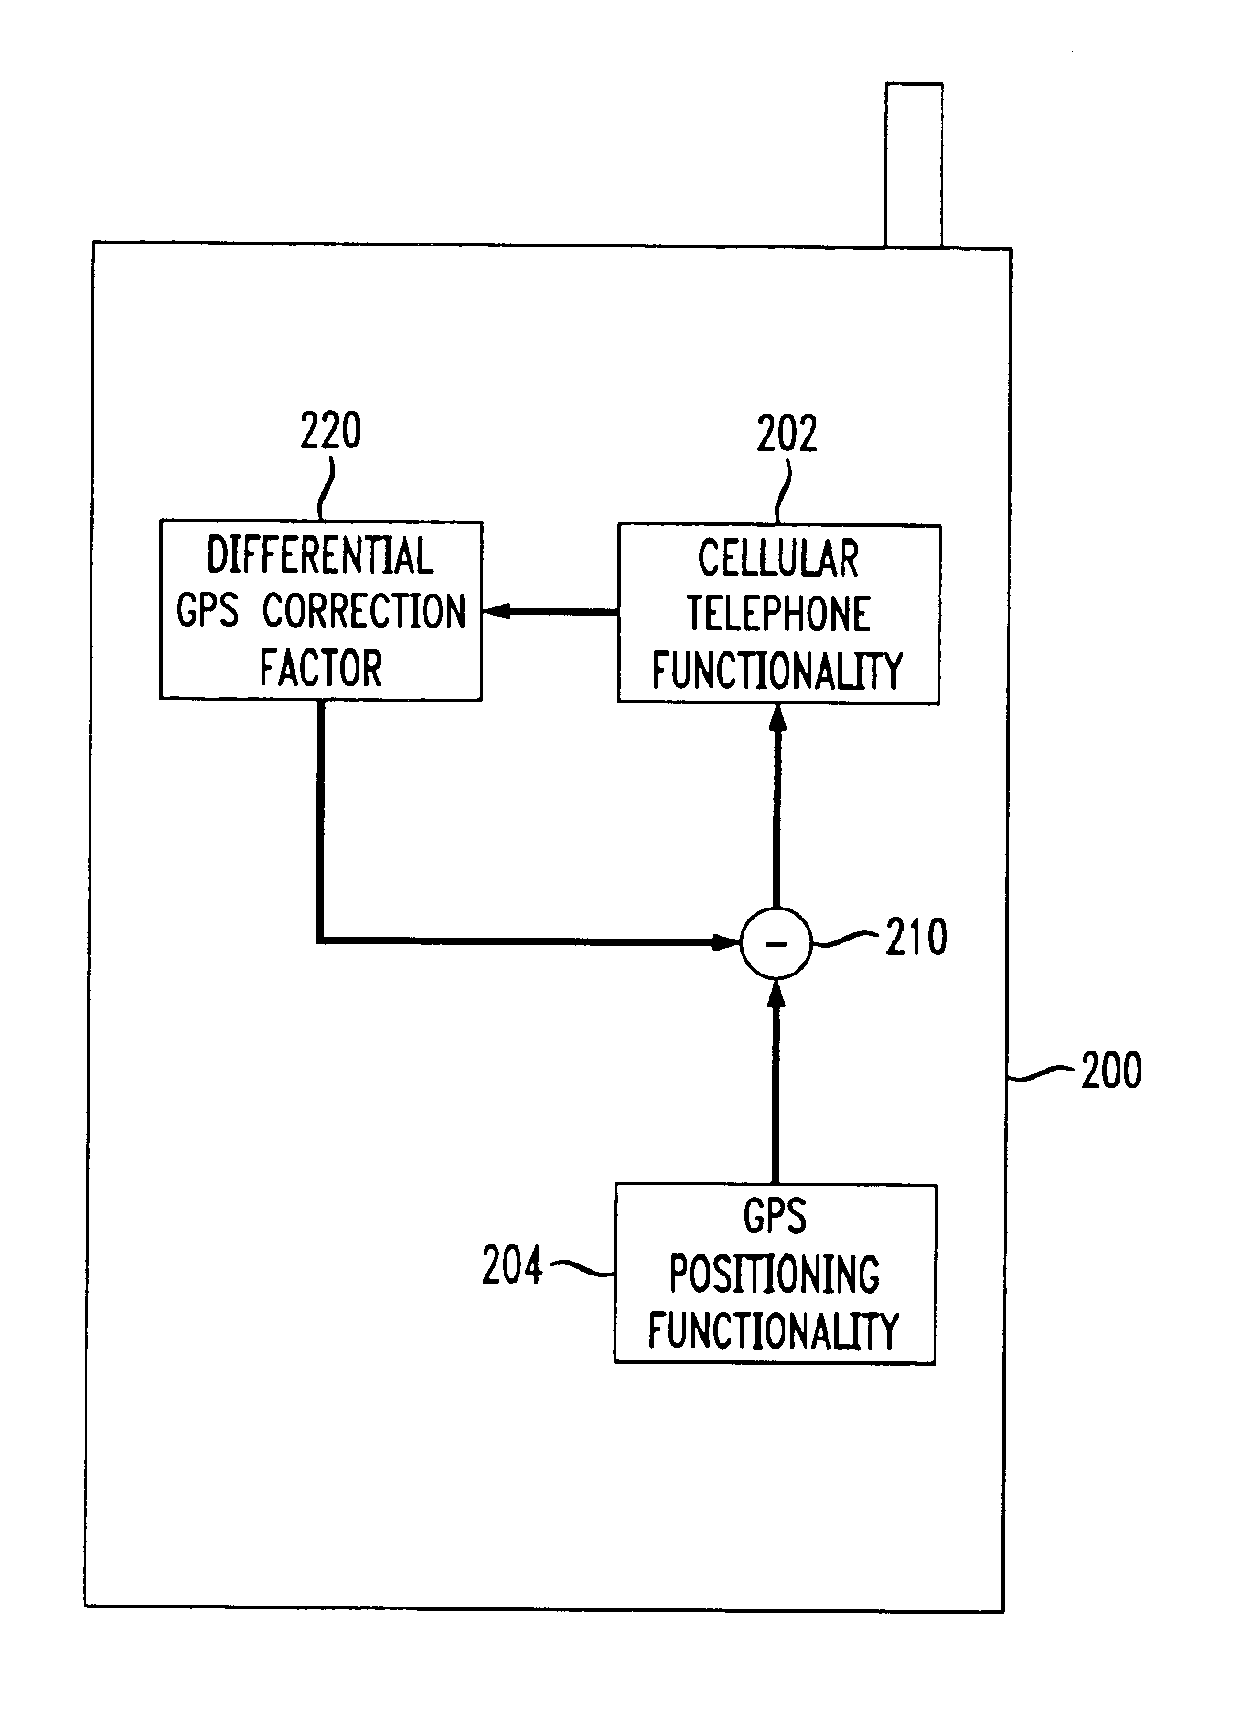 Differential GPS and/or glonass with wireless communications capability